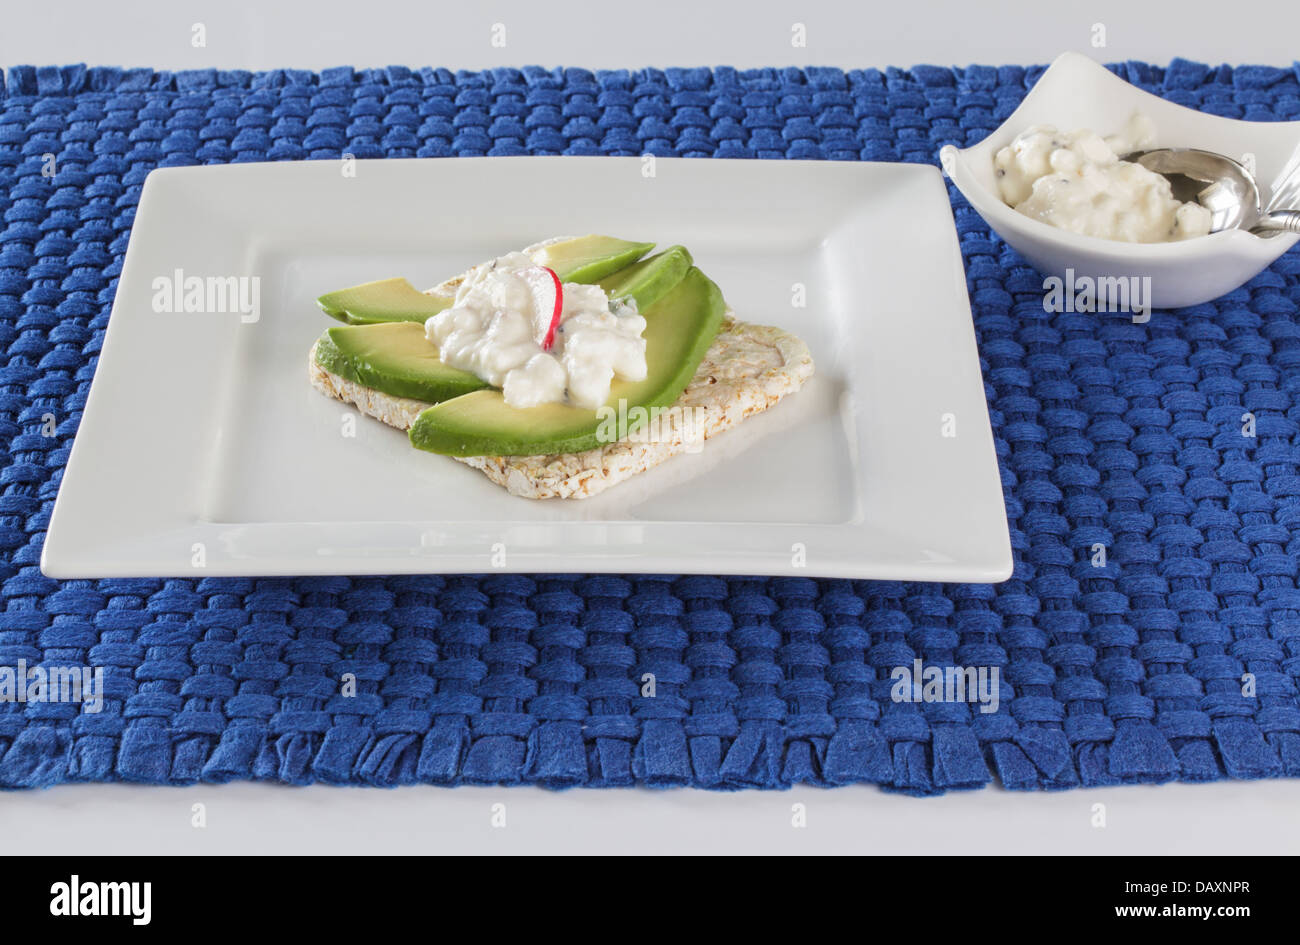 Rice cake topped with avocado and cottage cheese Stock Photo